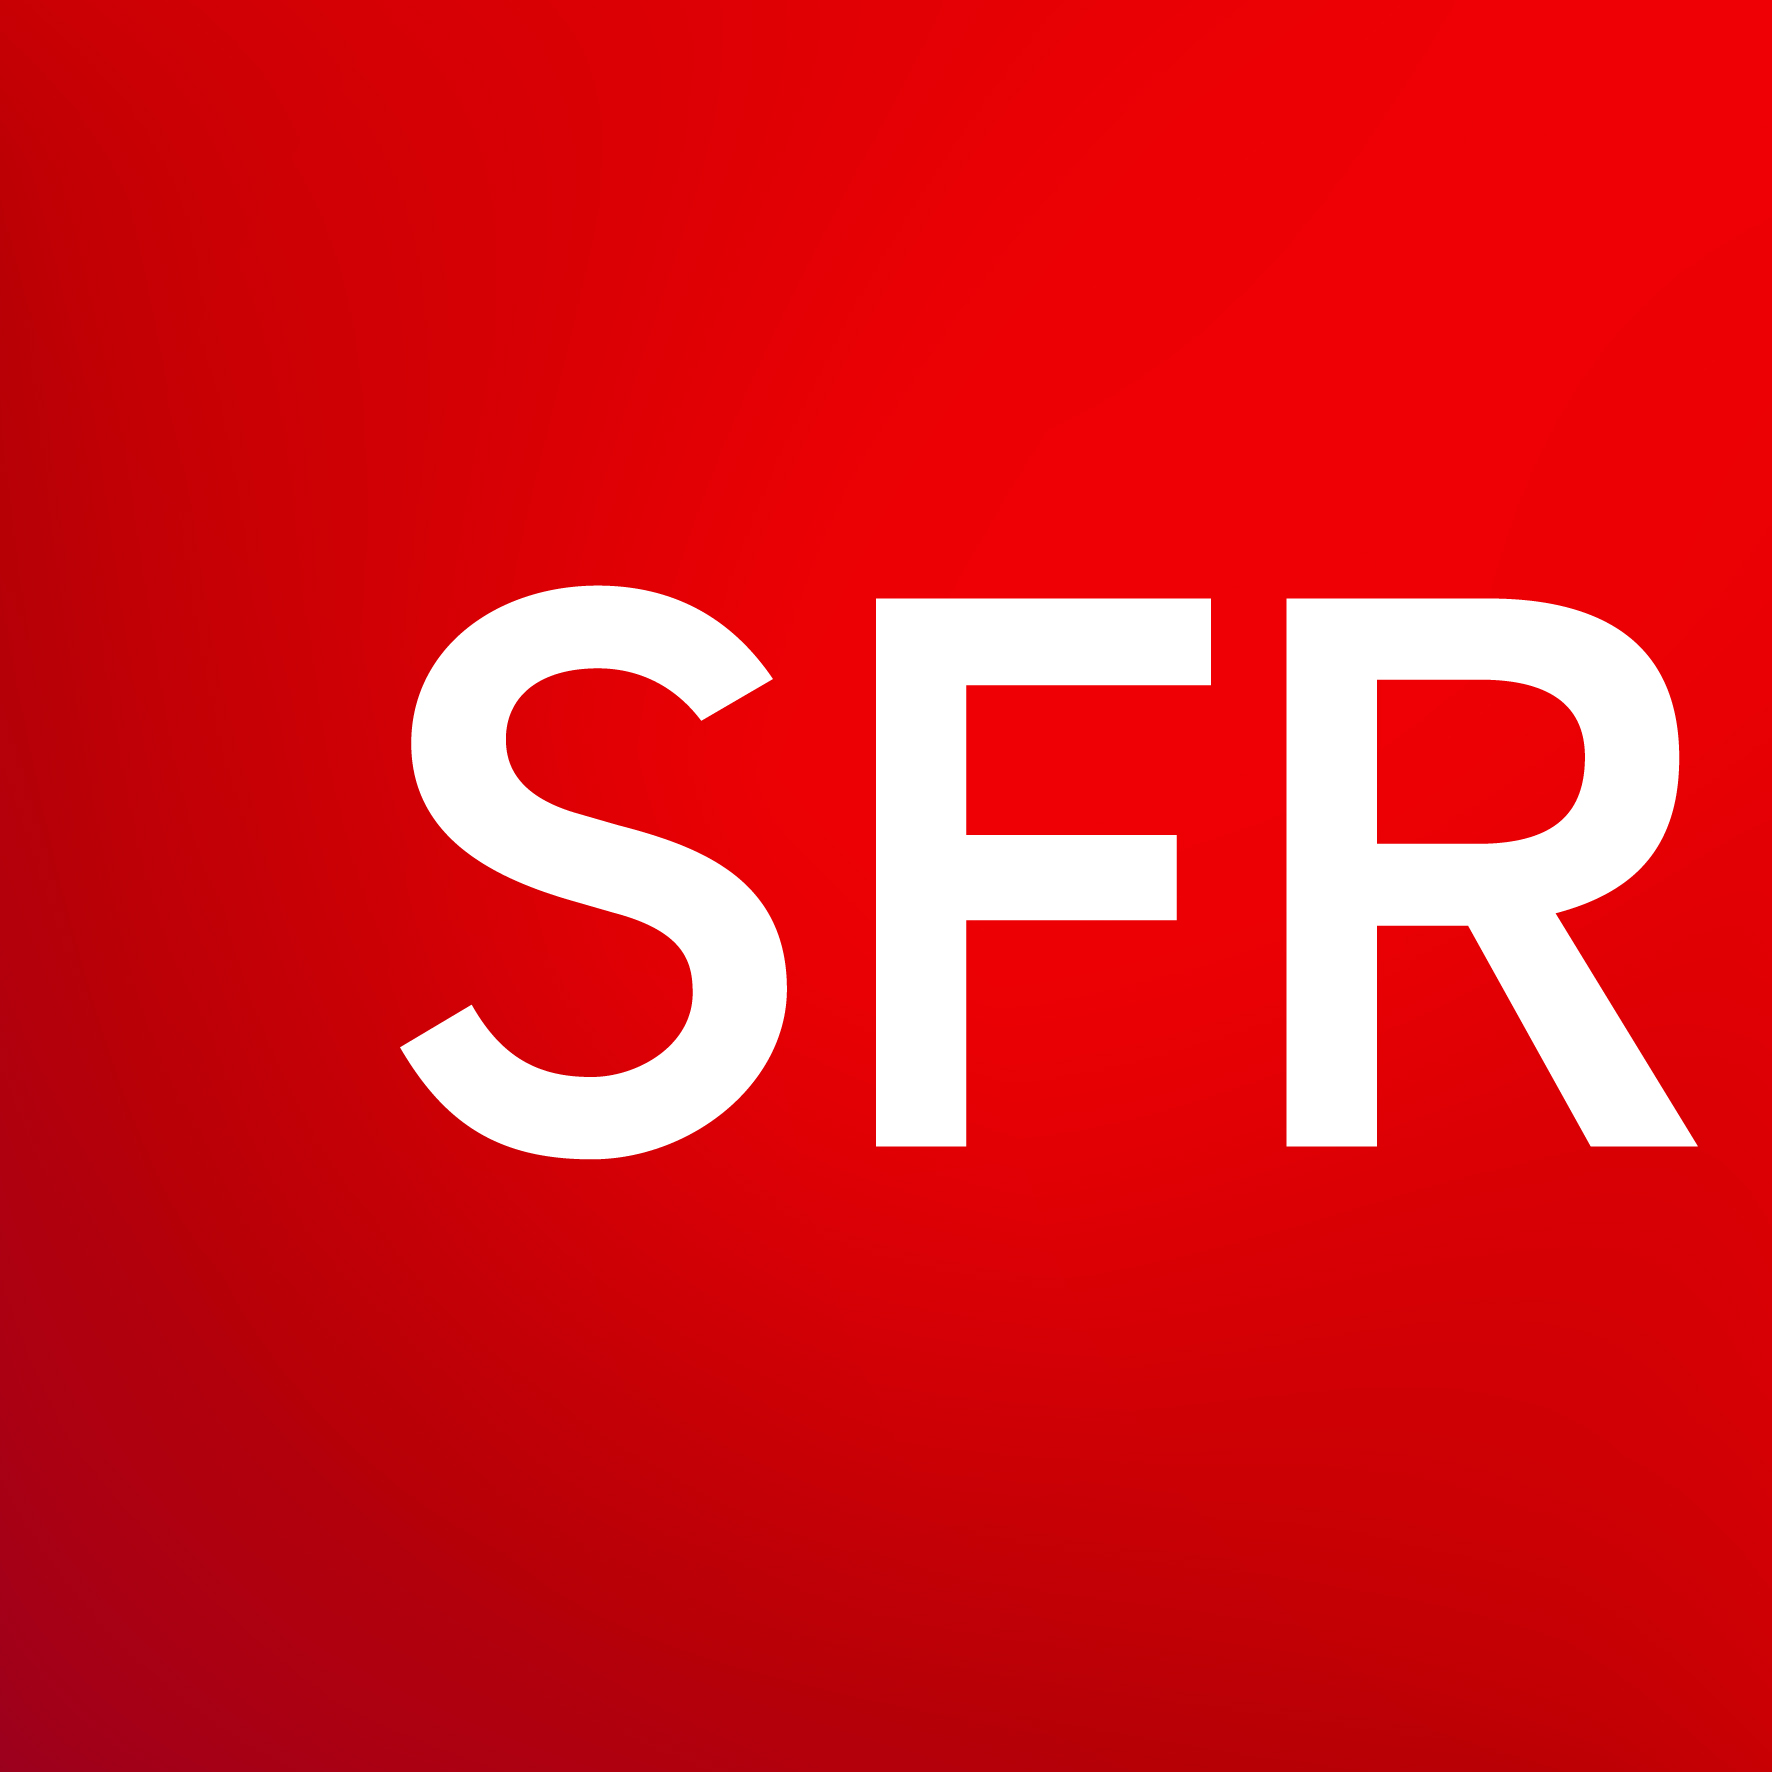 More about SFR